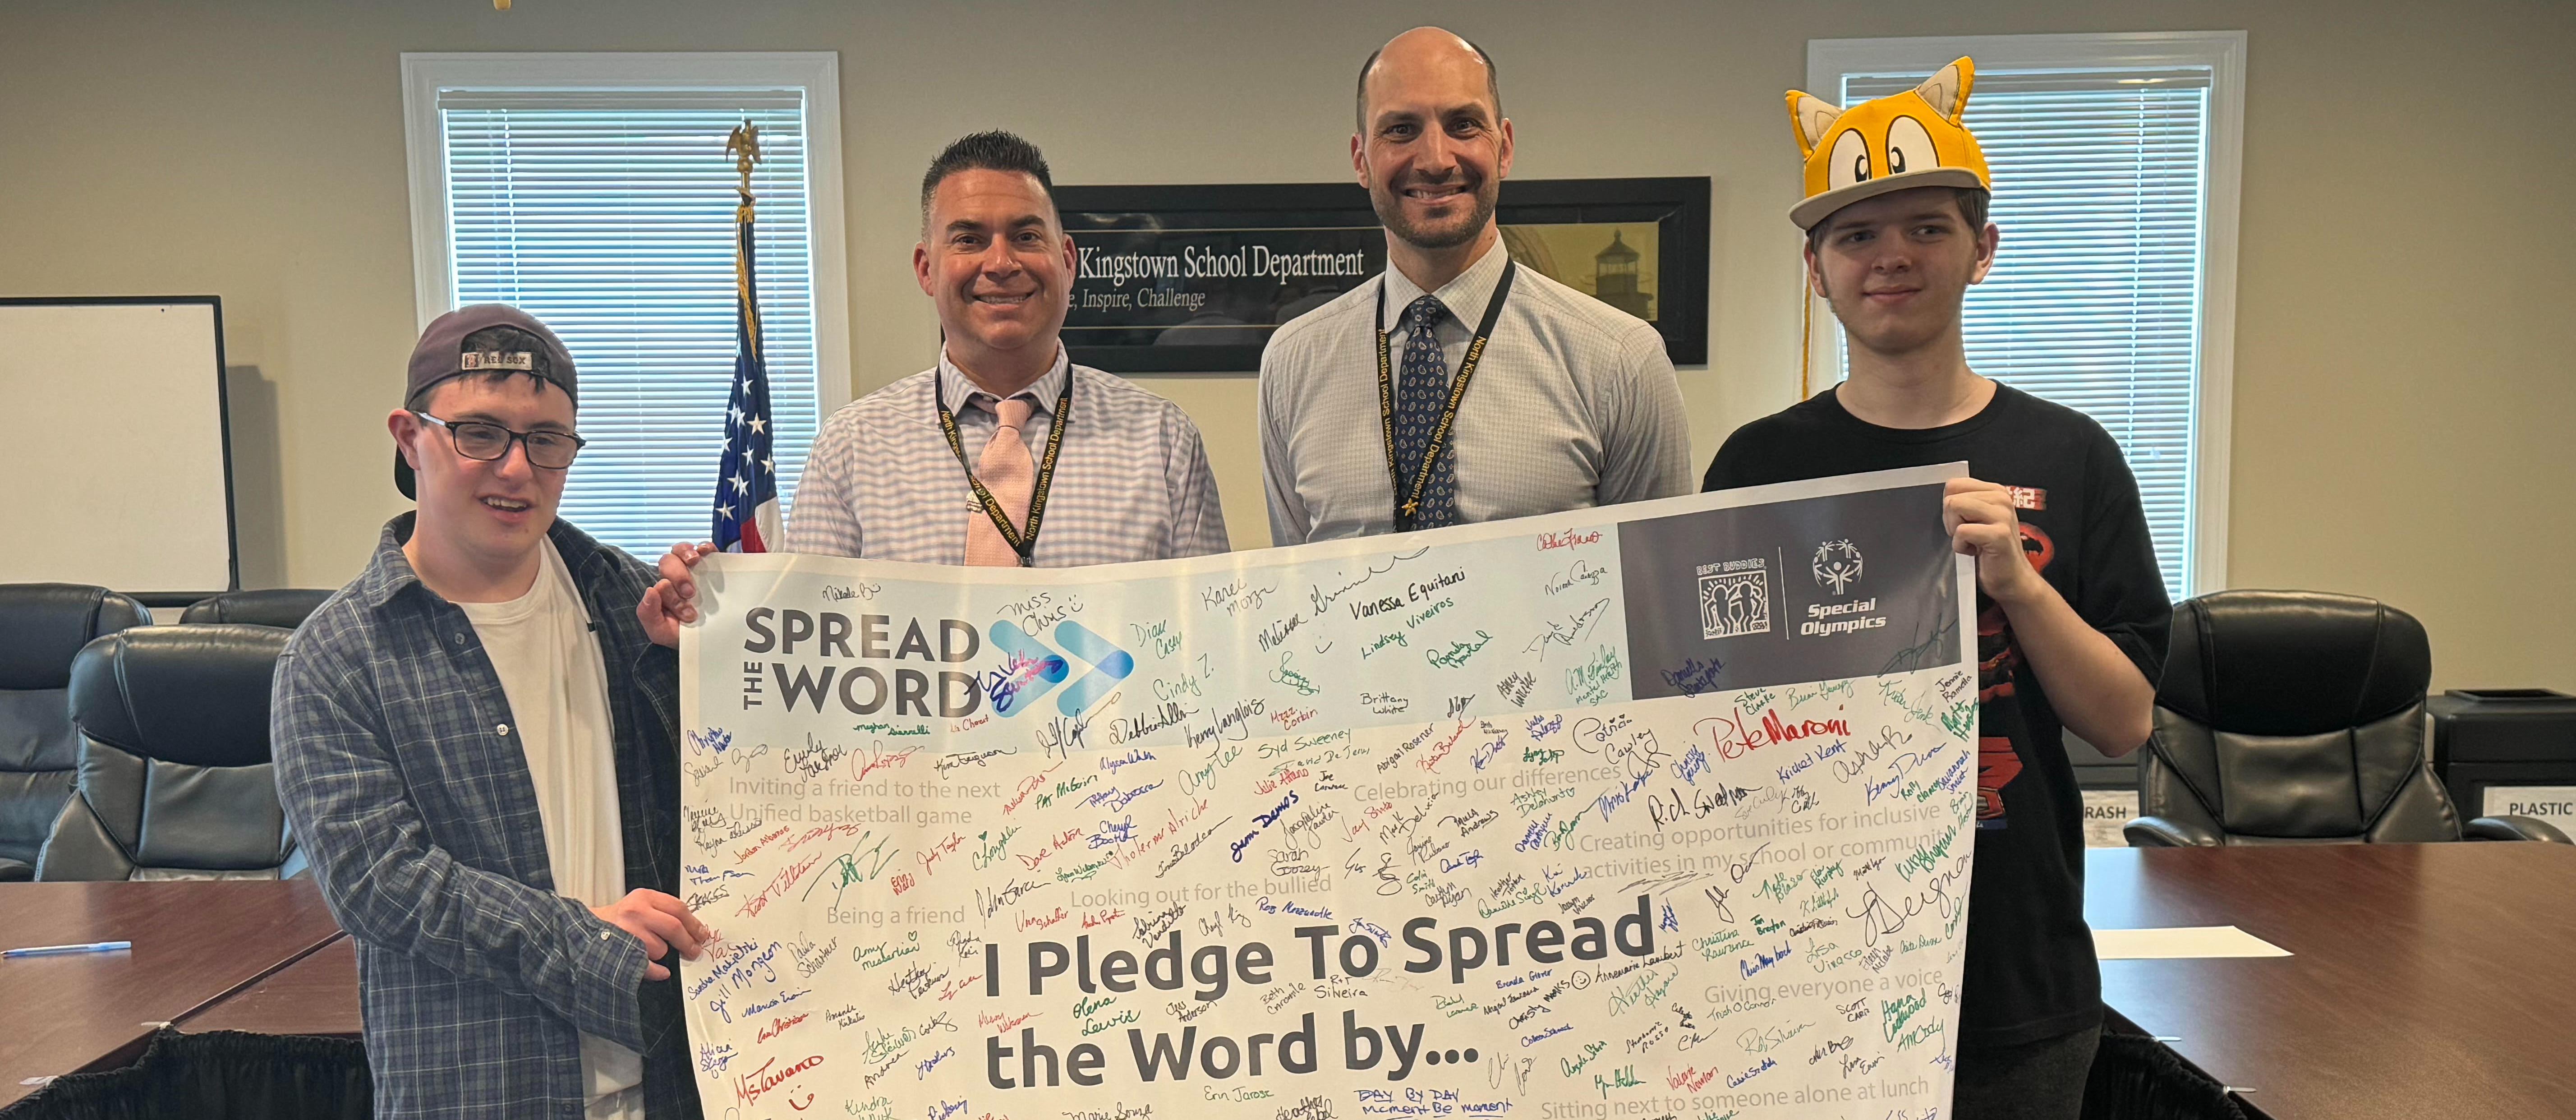 Students and staff holding a signed banner that reads "I pledge to spread the word by..."